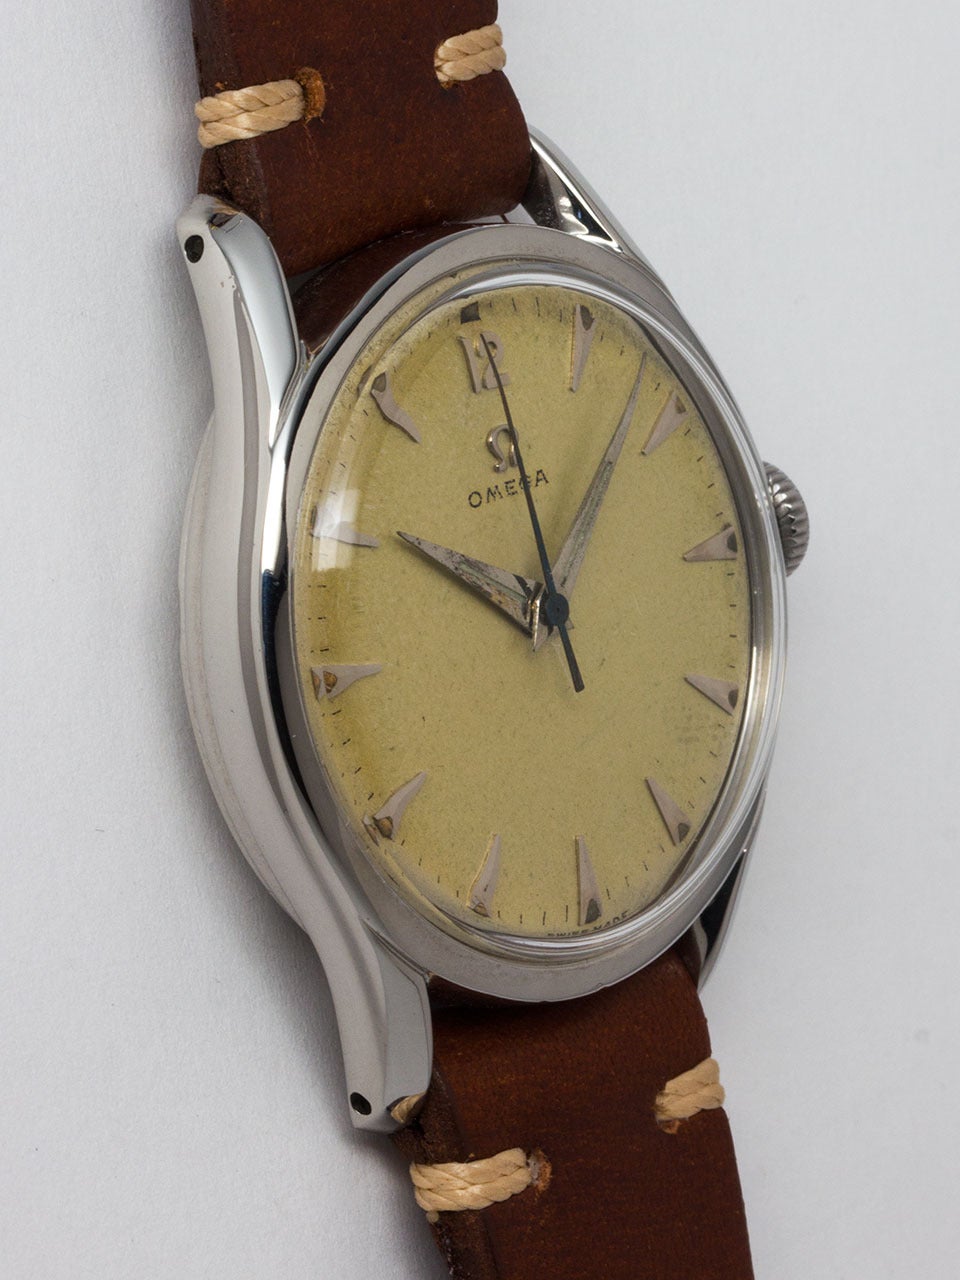 Omega Stainless Steel Bombe Wristwatch circa 1950s. Oversize dress model measuring 36 x 43mm. With original lightly patina'd dial with raised silver indexes, applied silver Omega logo, and with tapered sword hands. 17 jewel manual wind movement with